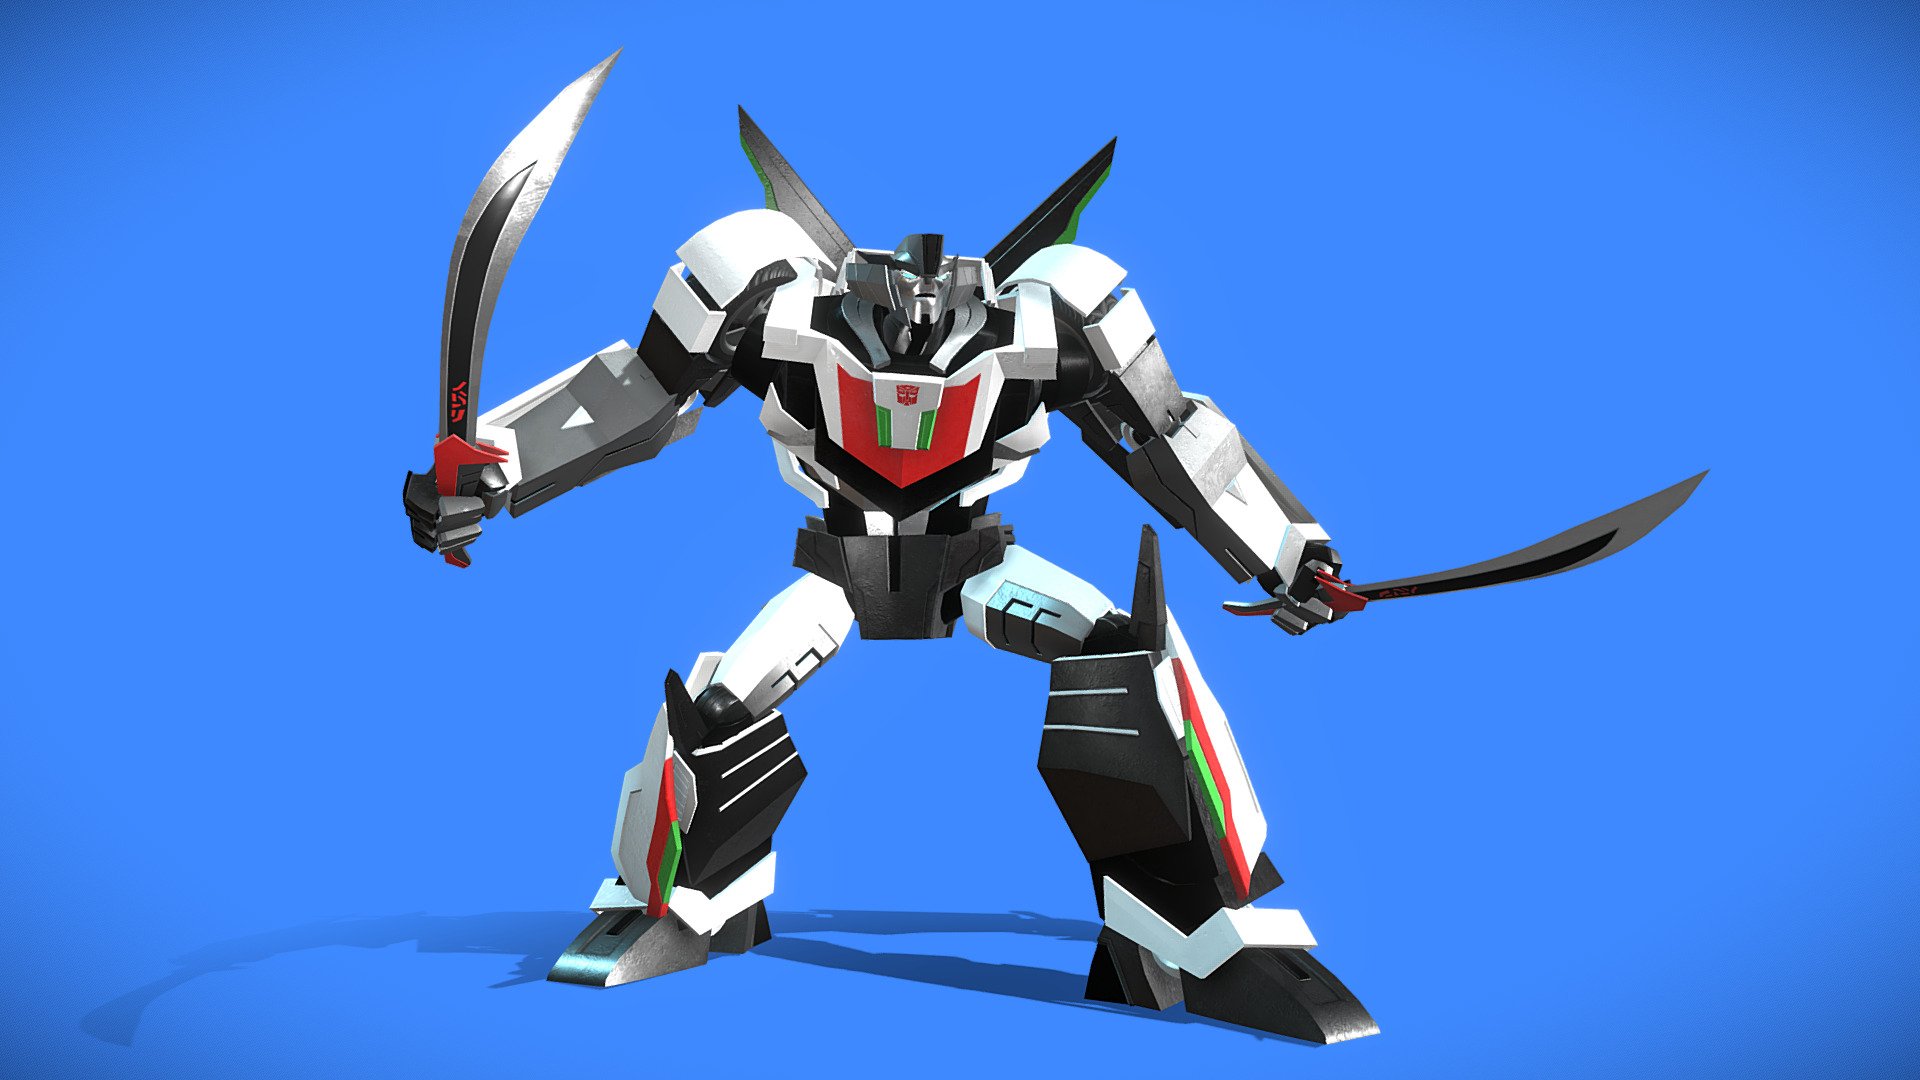 3D model rig of Wheeljack, an Autobot from the Transformers Prime series. With rigging and PBR materials, ensuring appropriate usability for animations and games.

The native file type is BLEND as it was created with Blender, however with OBJ, FBX as well as PBR textures provided, it will work with any 3D programs.

All rights of the Transformers brand belongs to Hasbro.

&mdash;NOTES&mdash;
For a more in depth look of the purchasable package, check out the portfolio post: https://www.artstation.com/artwork/q9K29a

&mdash;DETAILS&mdash;

In this package includes:





Blender file (.BLEND) with armature rigging, proper materials and PBR textures set up.




PBR textures in 4K, including these maps: Color, Metallic, Specular, Roughness, Emission.




OBJ and FBX files.



The model in Blender project file also completed with Crease edges and therefor, subdivision ready.

Thank you for your support of my products and look out for more soon 3d model